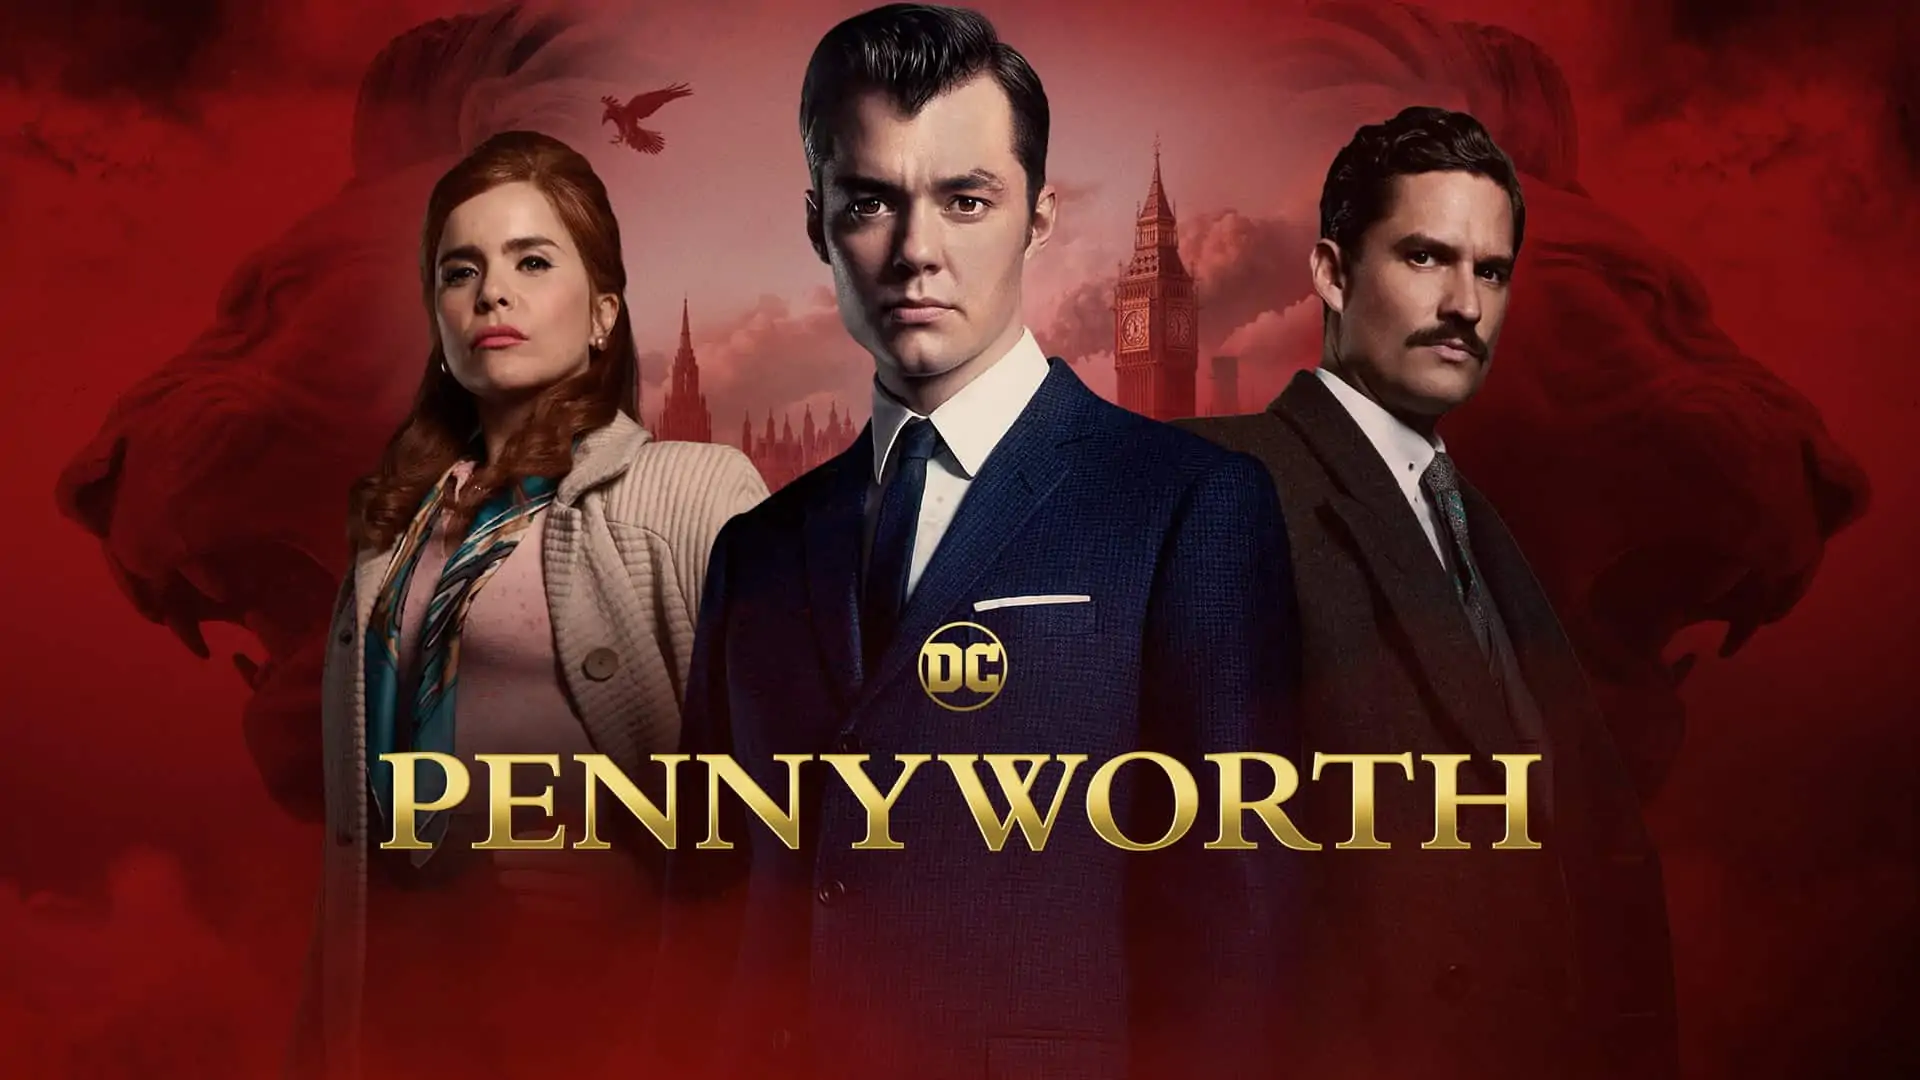 The Cast and Characters of DC’s “Pennyworth” TV Show